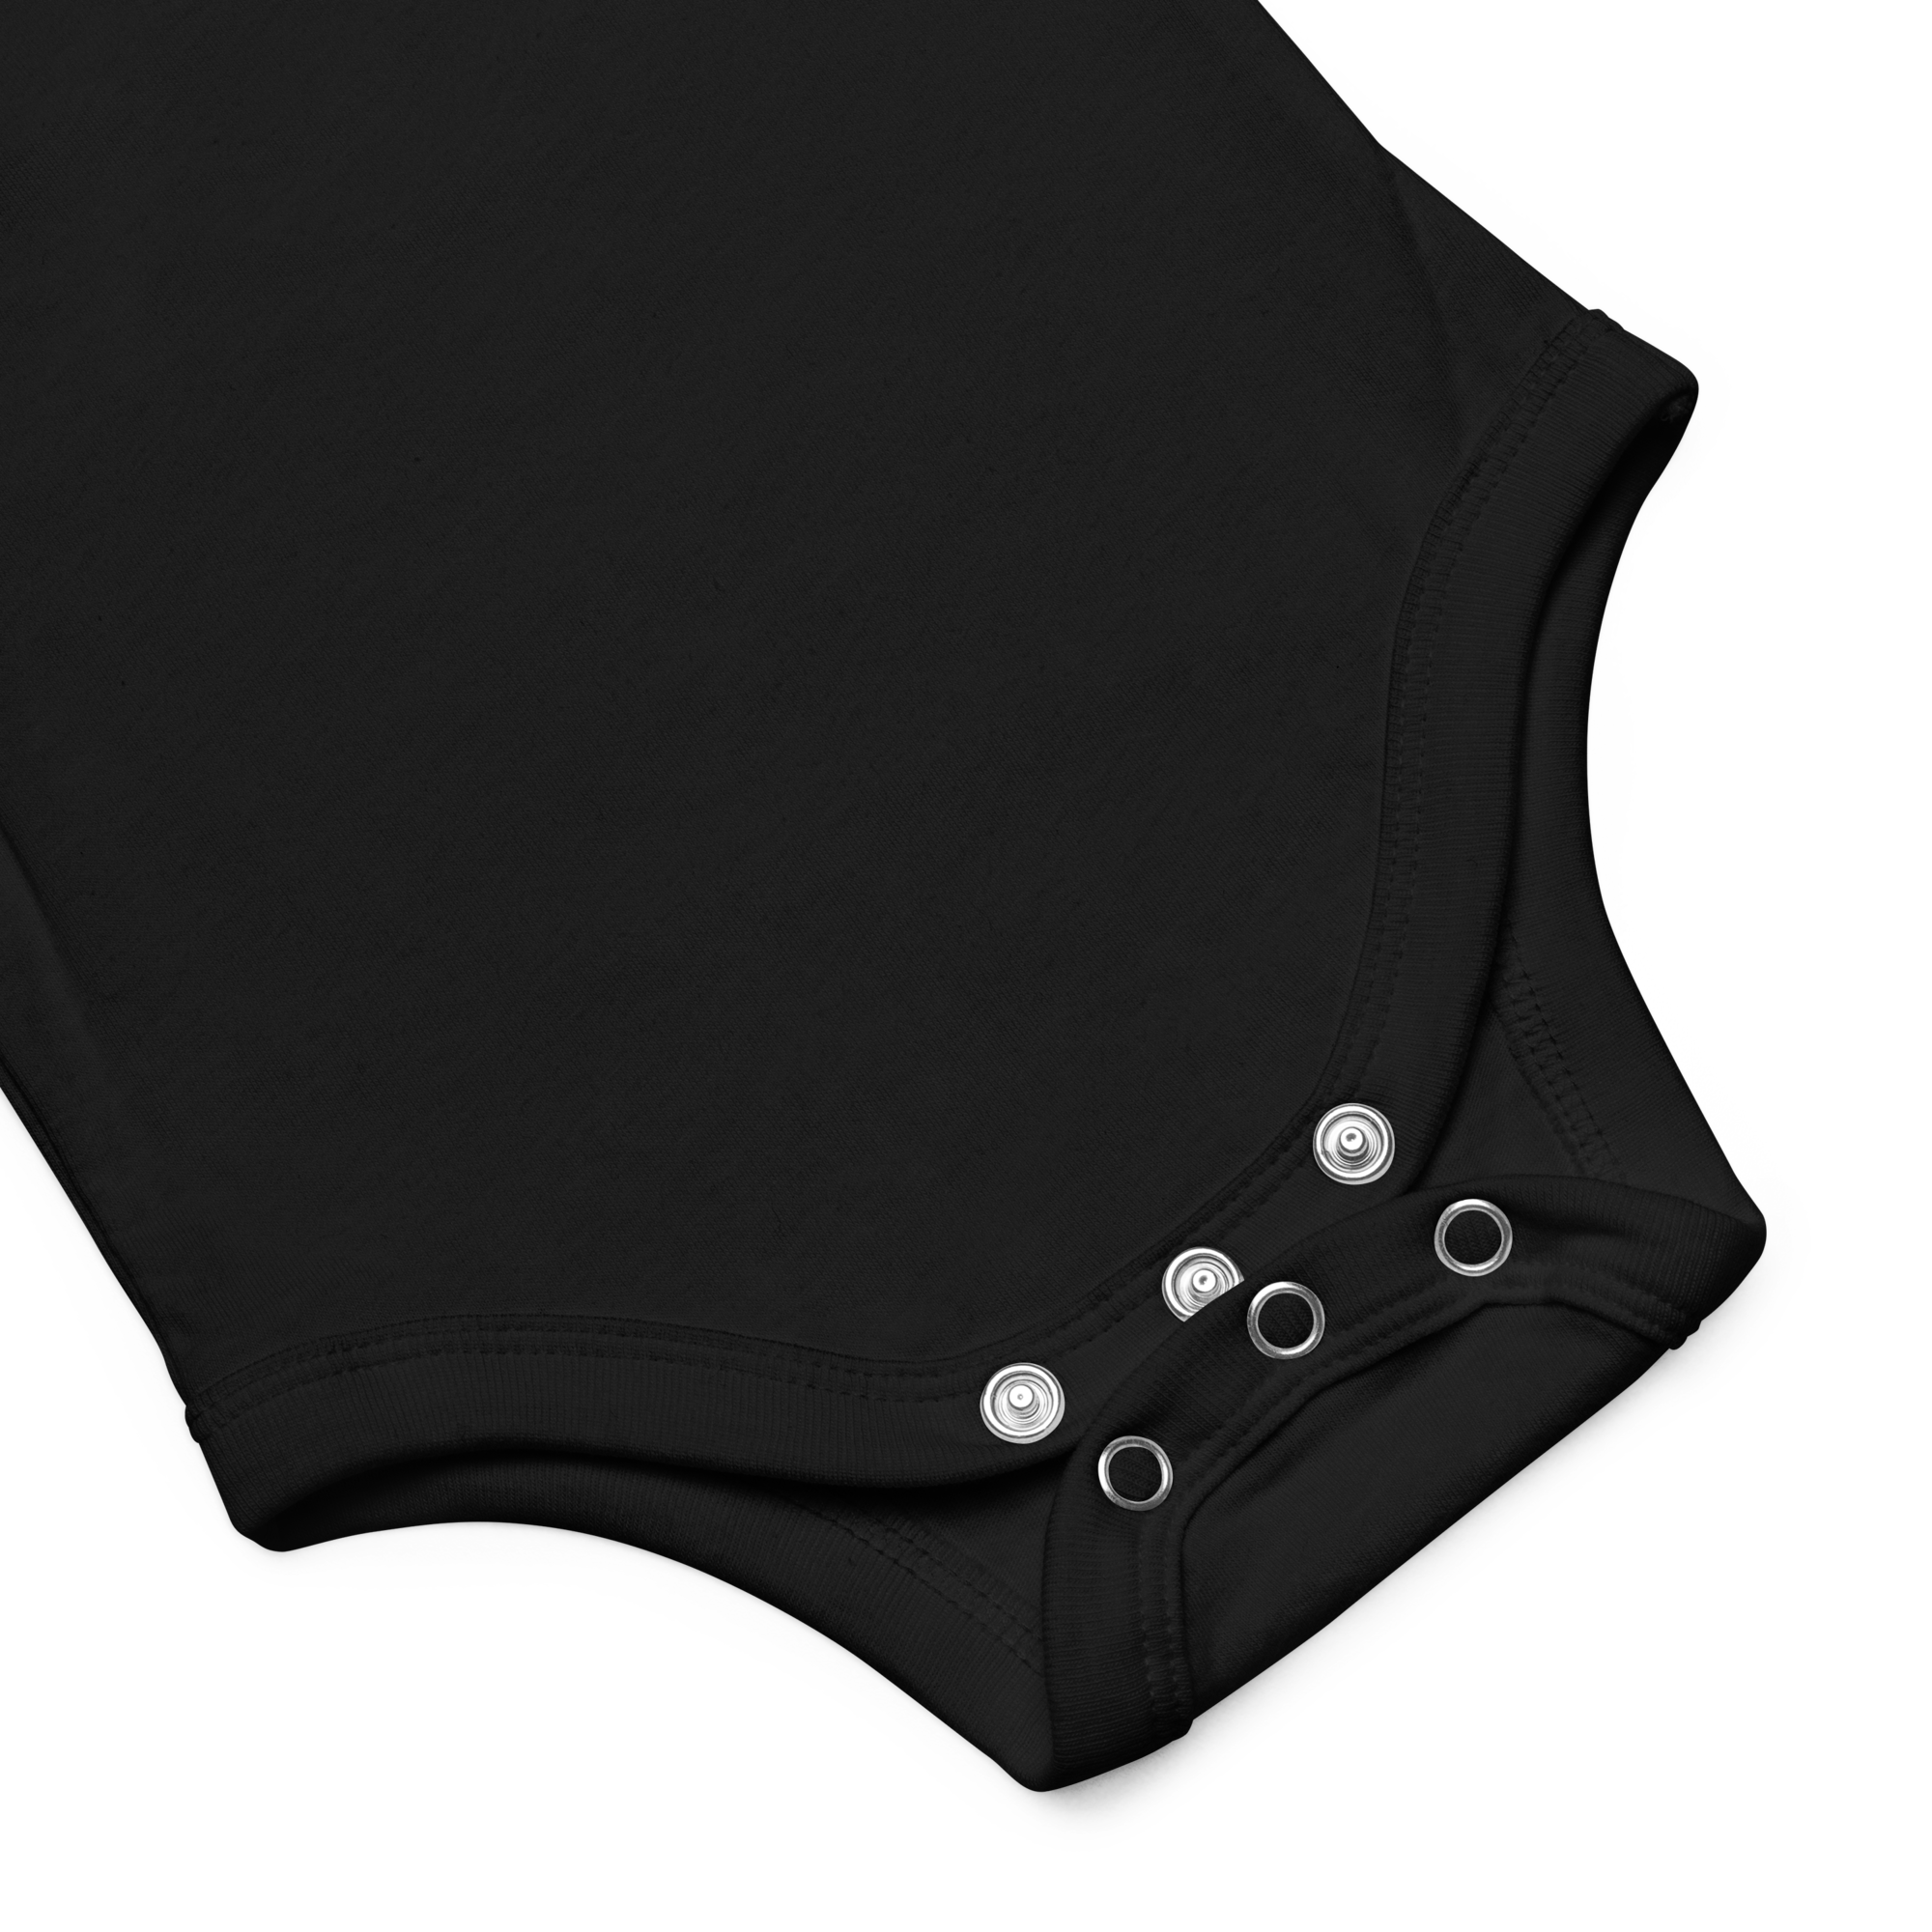 Signature Noir Collection Baby Onsie